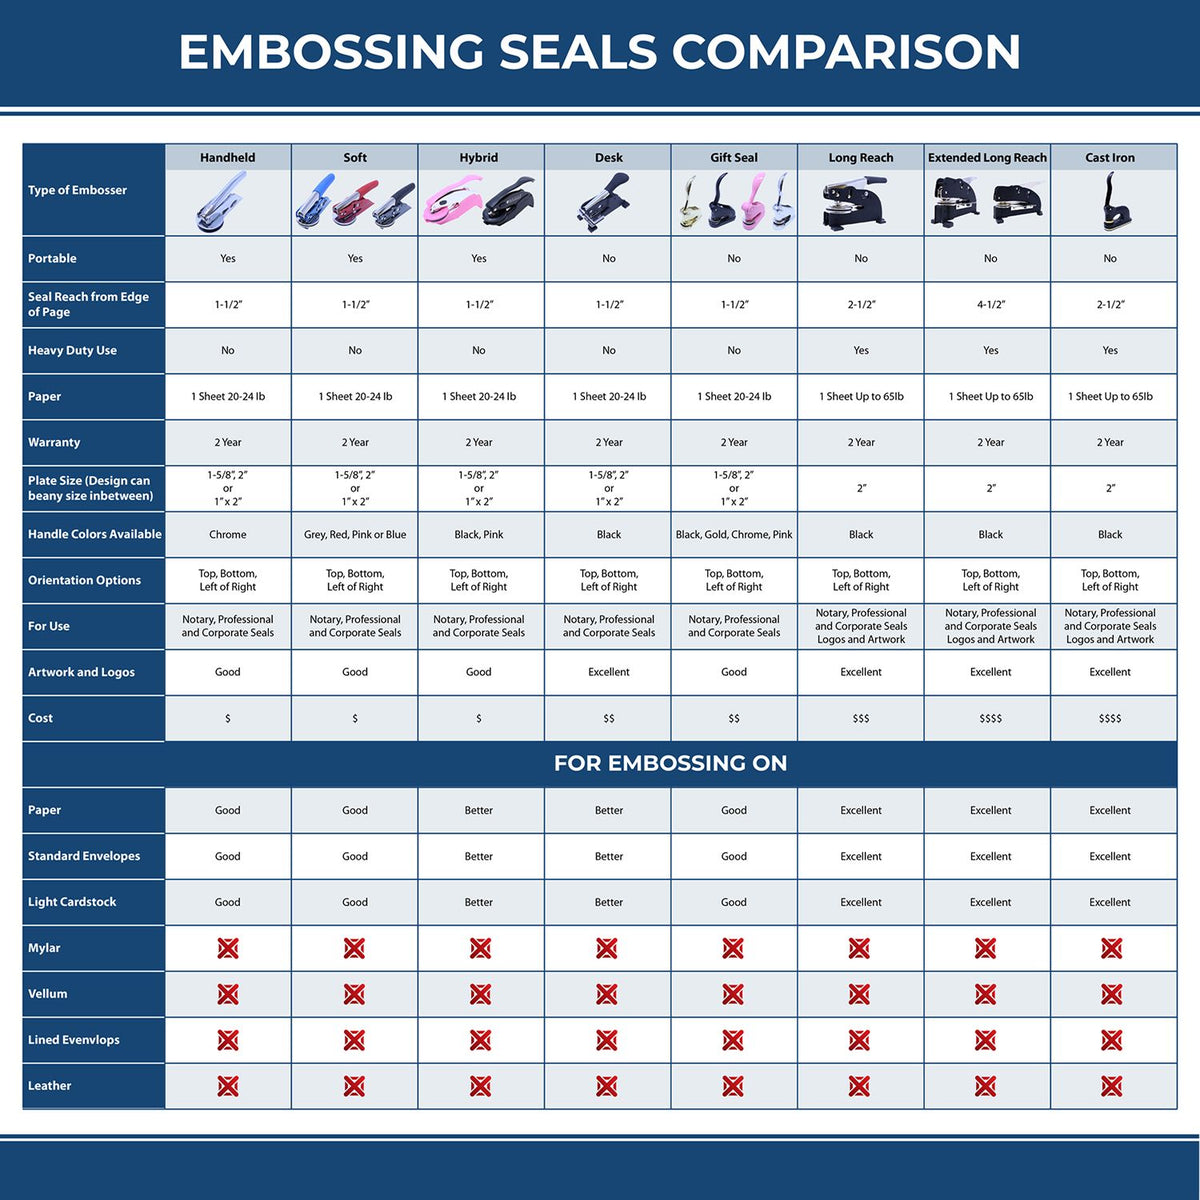 A comparison chart for the different types of mount models available for the State of Ohio Extended Long Reach Geologist Seal